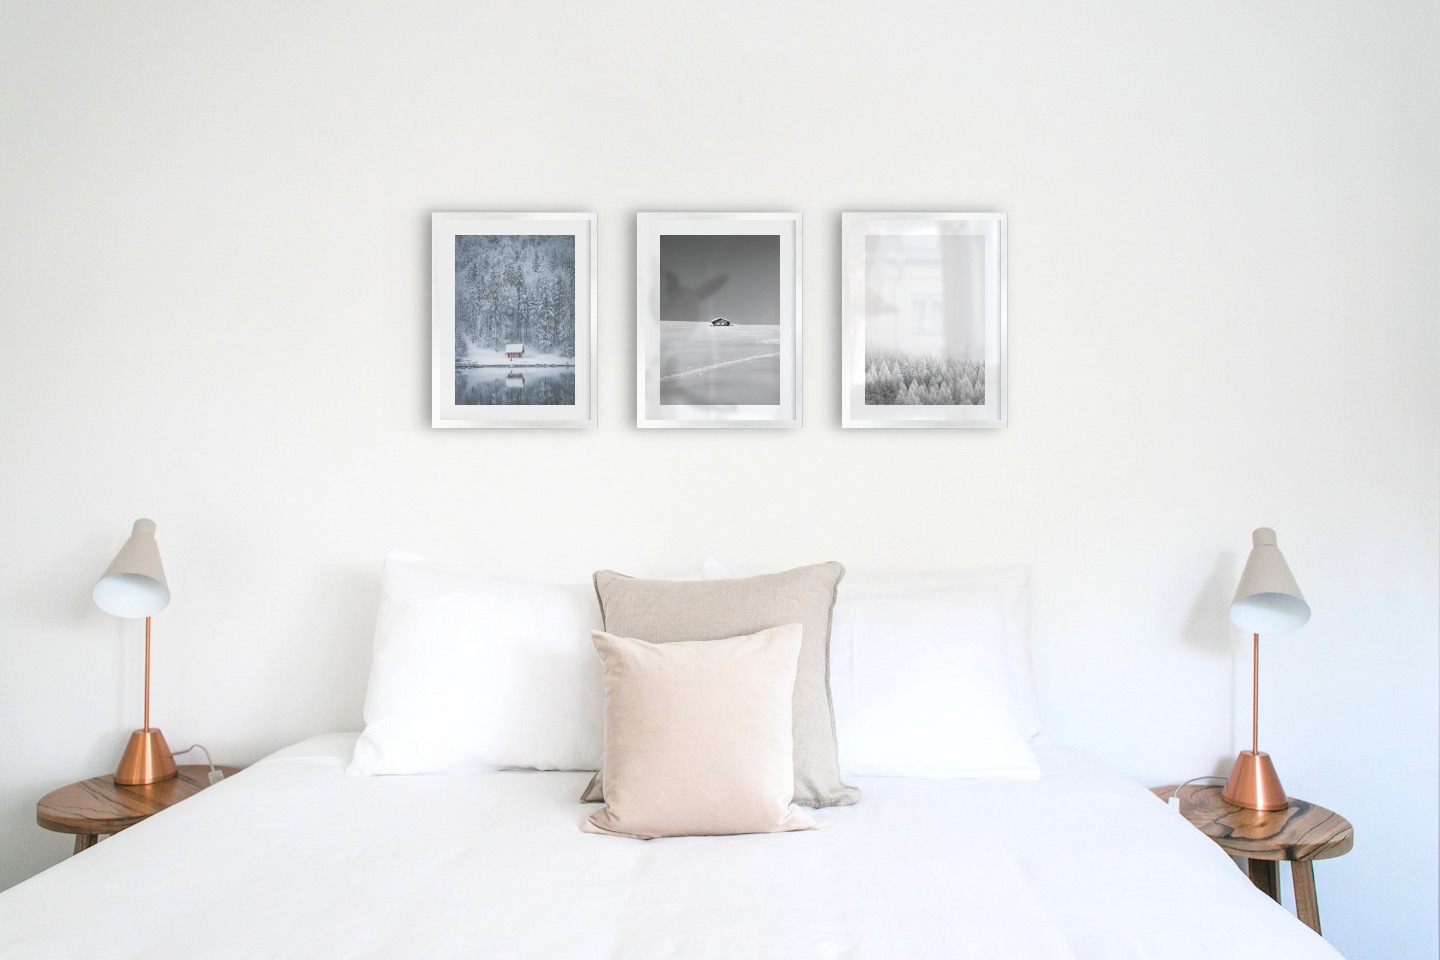 Gallery wall with picture frames in silver in sizes 30x40 with prints "Cottage by the lake", "Cottage in the snow" and "Wooden tops in winter"